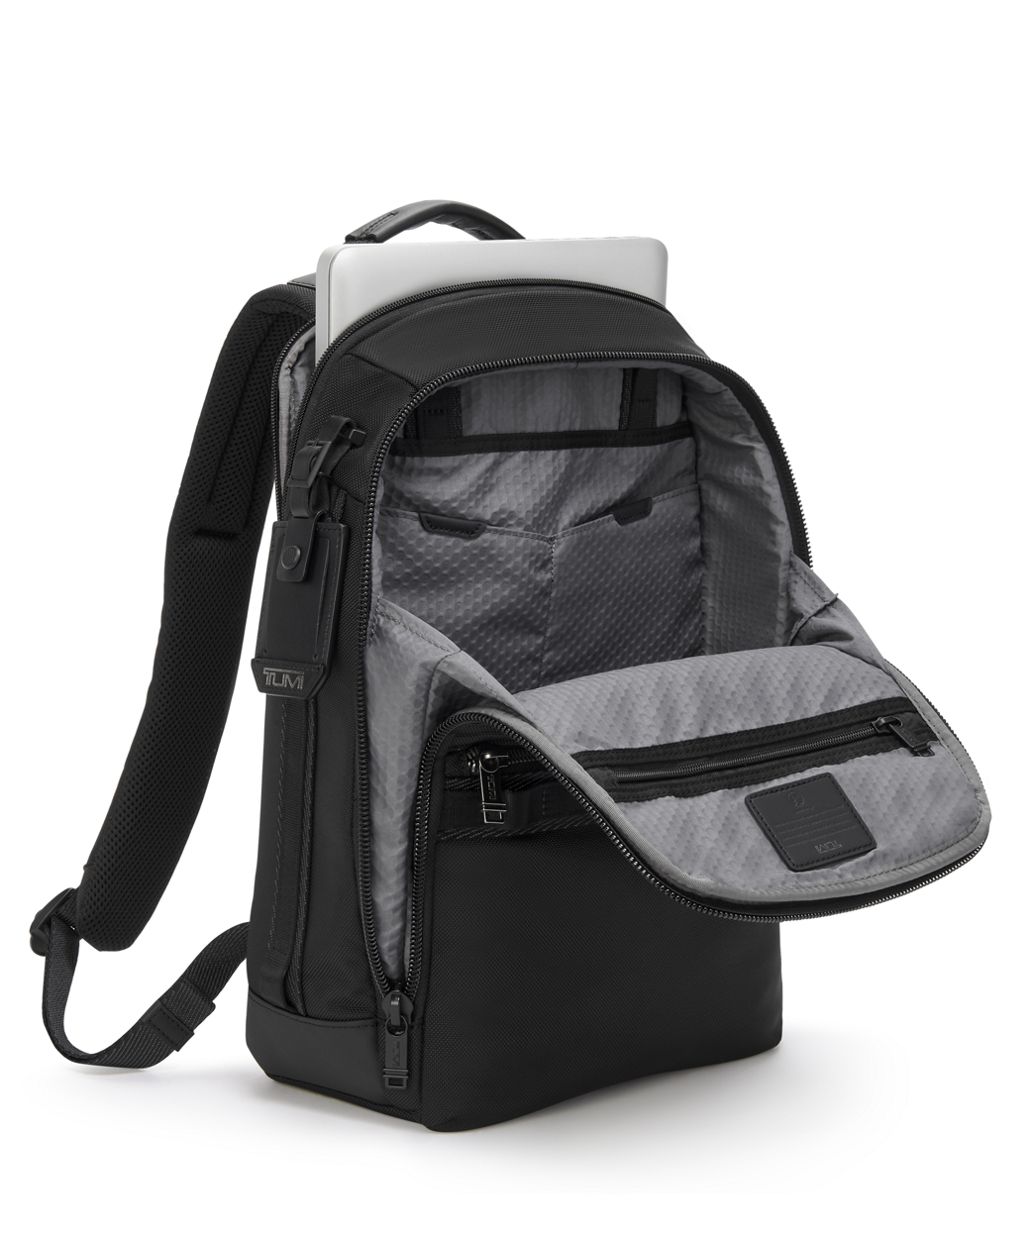 Tumi Alpha Bravo Backpack - Like New Condition for Sale in